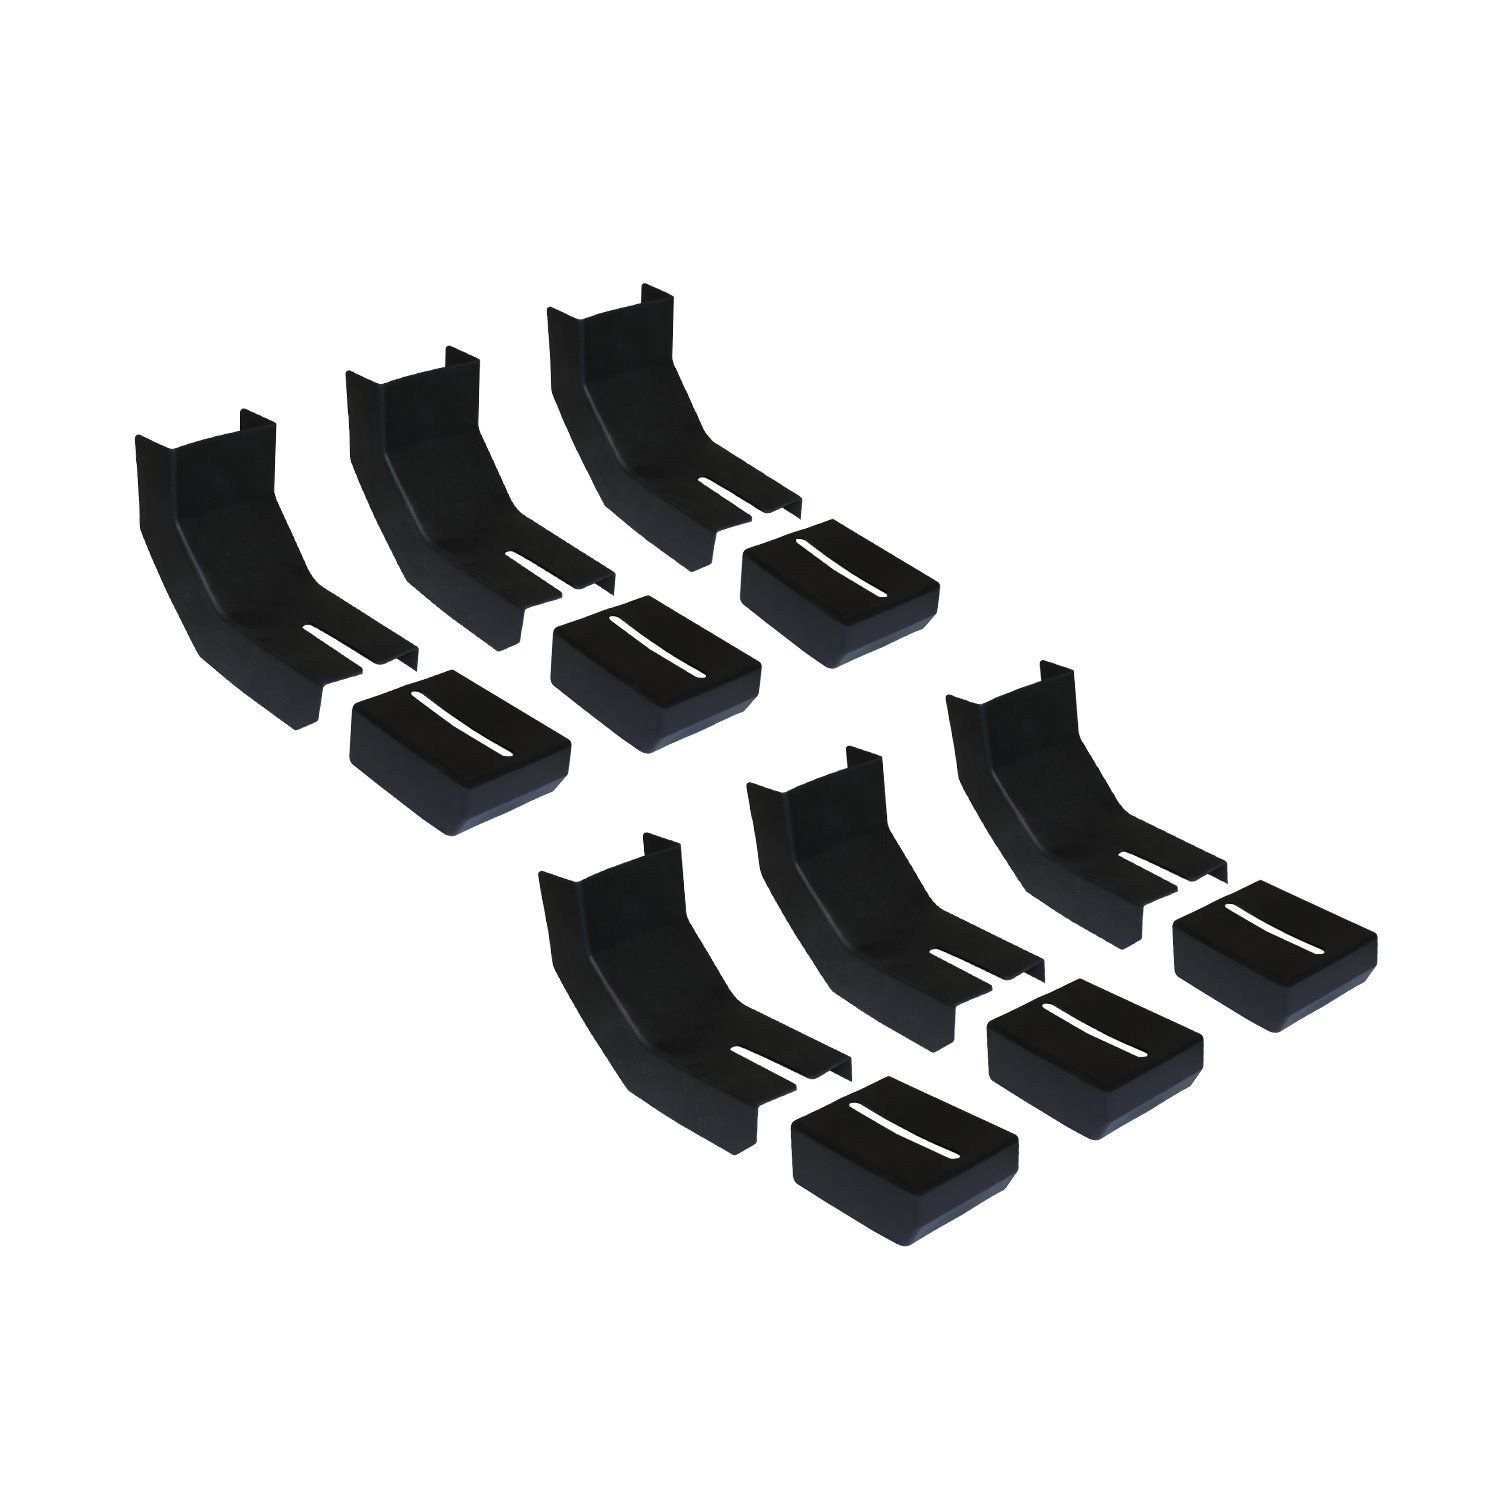 RB-BKC6 Raptor Series Bracket Covers Thermoplastic Rubber for Raptor Series Slide Track Running Boards Only, Qty 6 Set